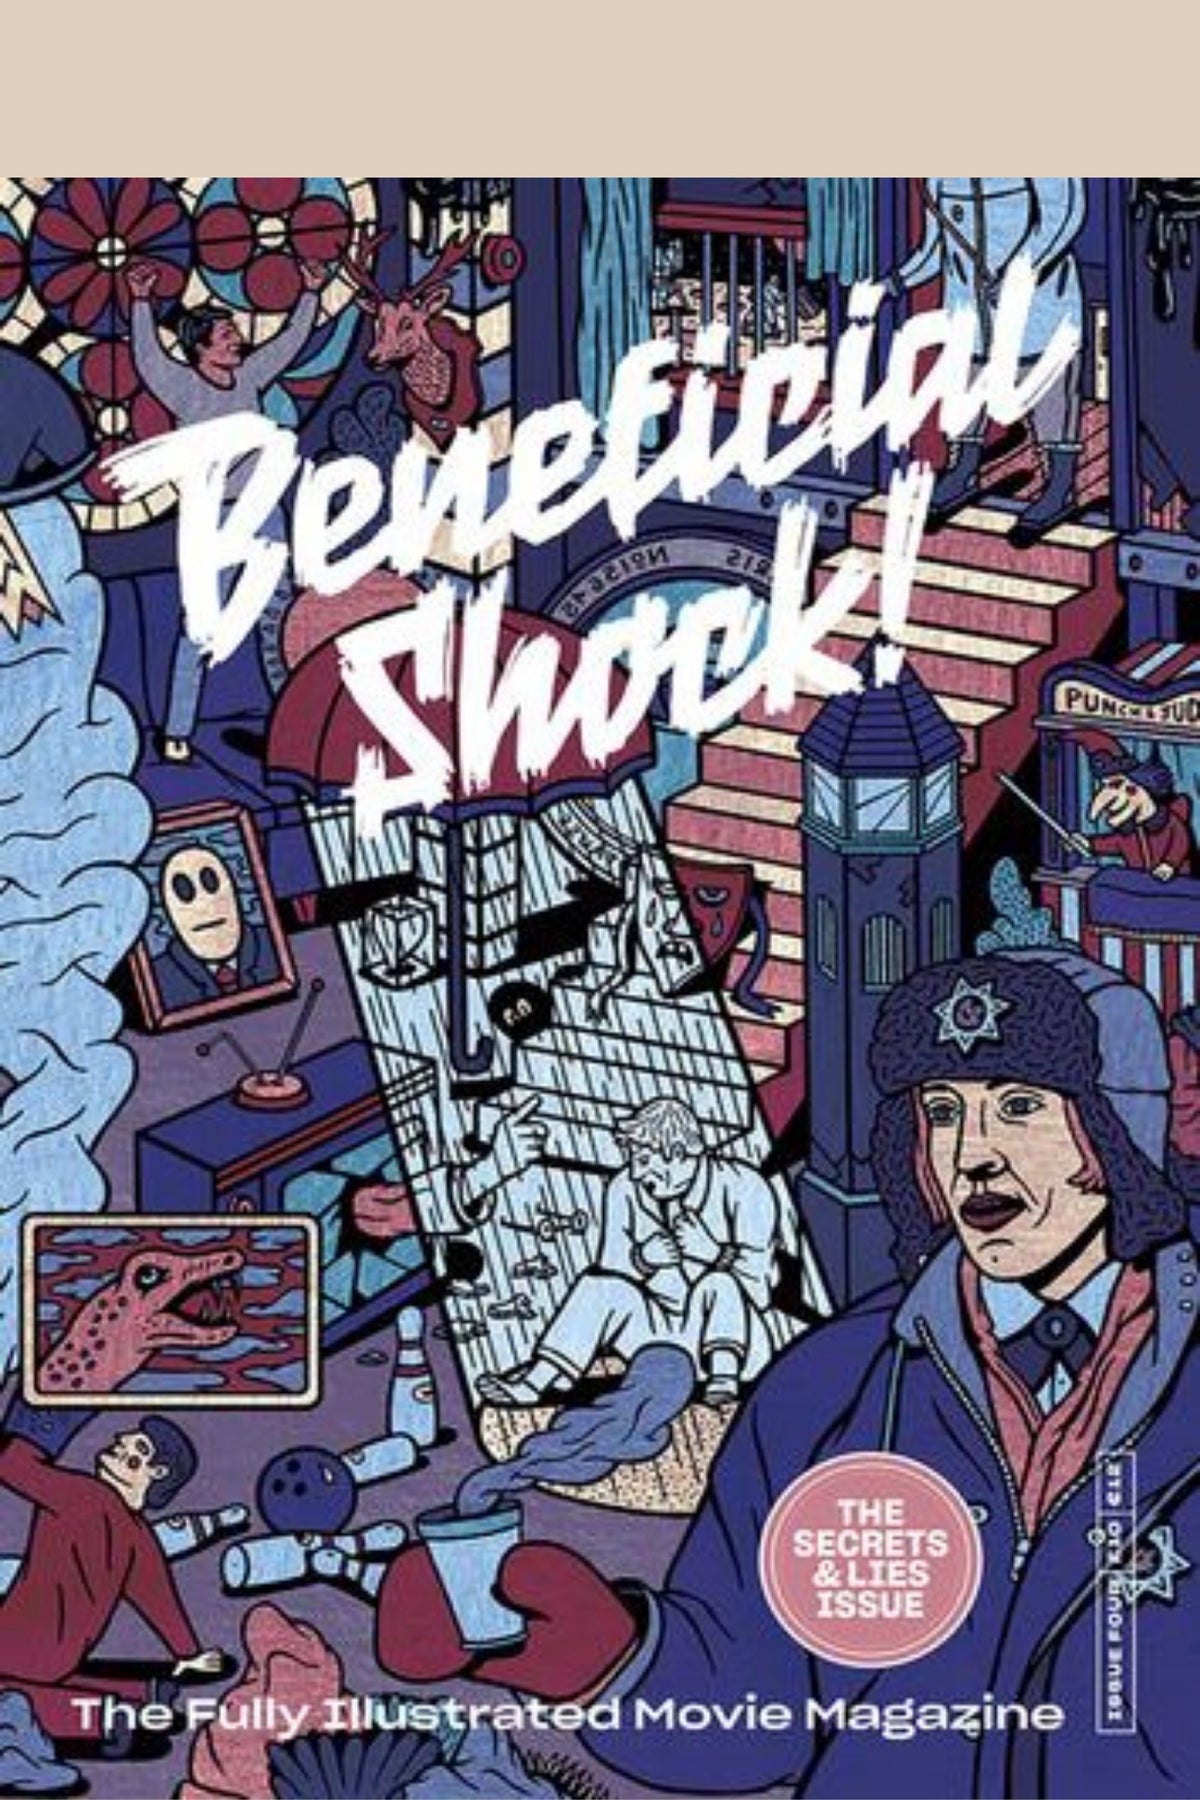 Beneficial Shock magazine Issue 5 cover